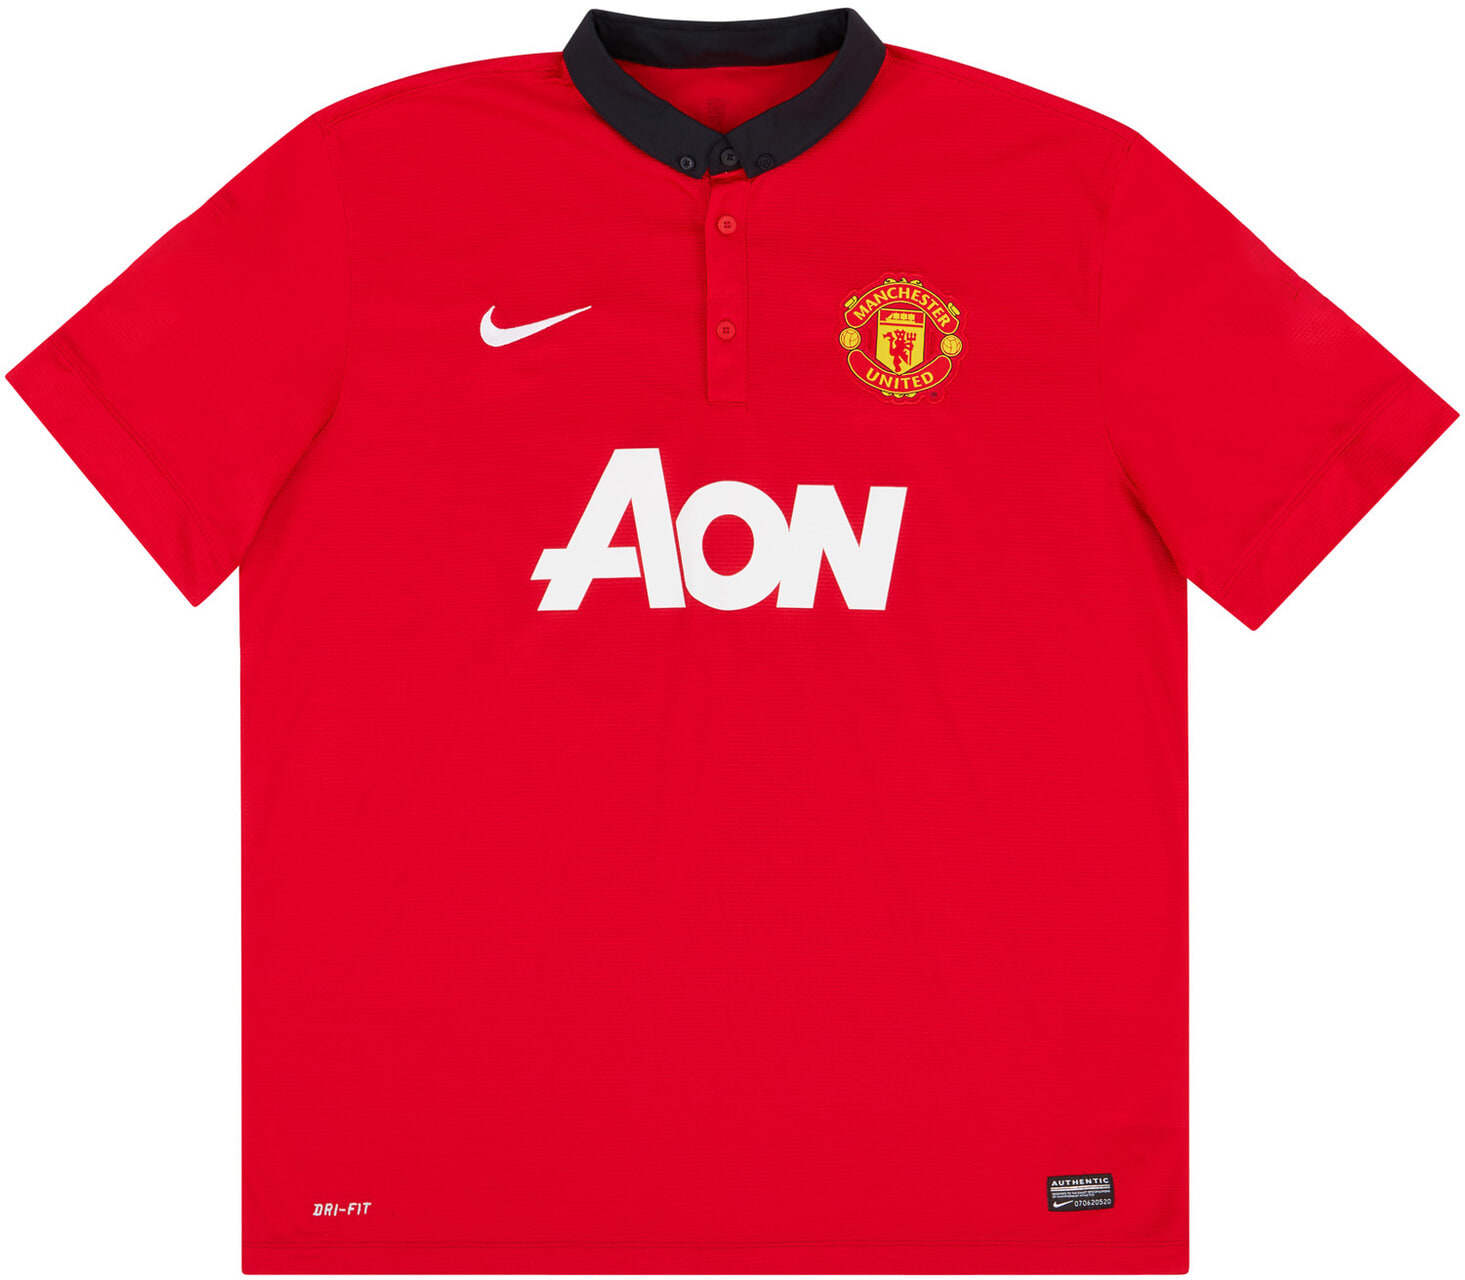 2013-14 Manchester United Home Shirt - 9/10 -